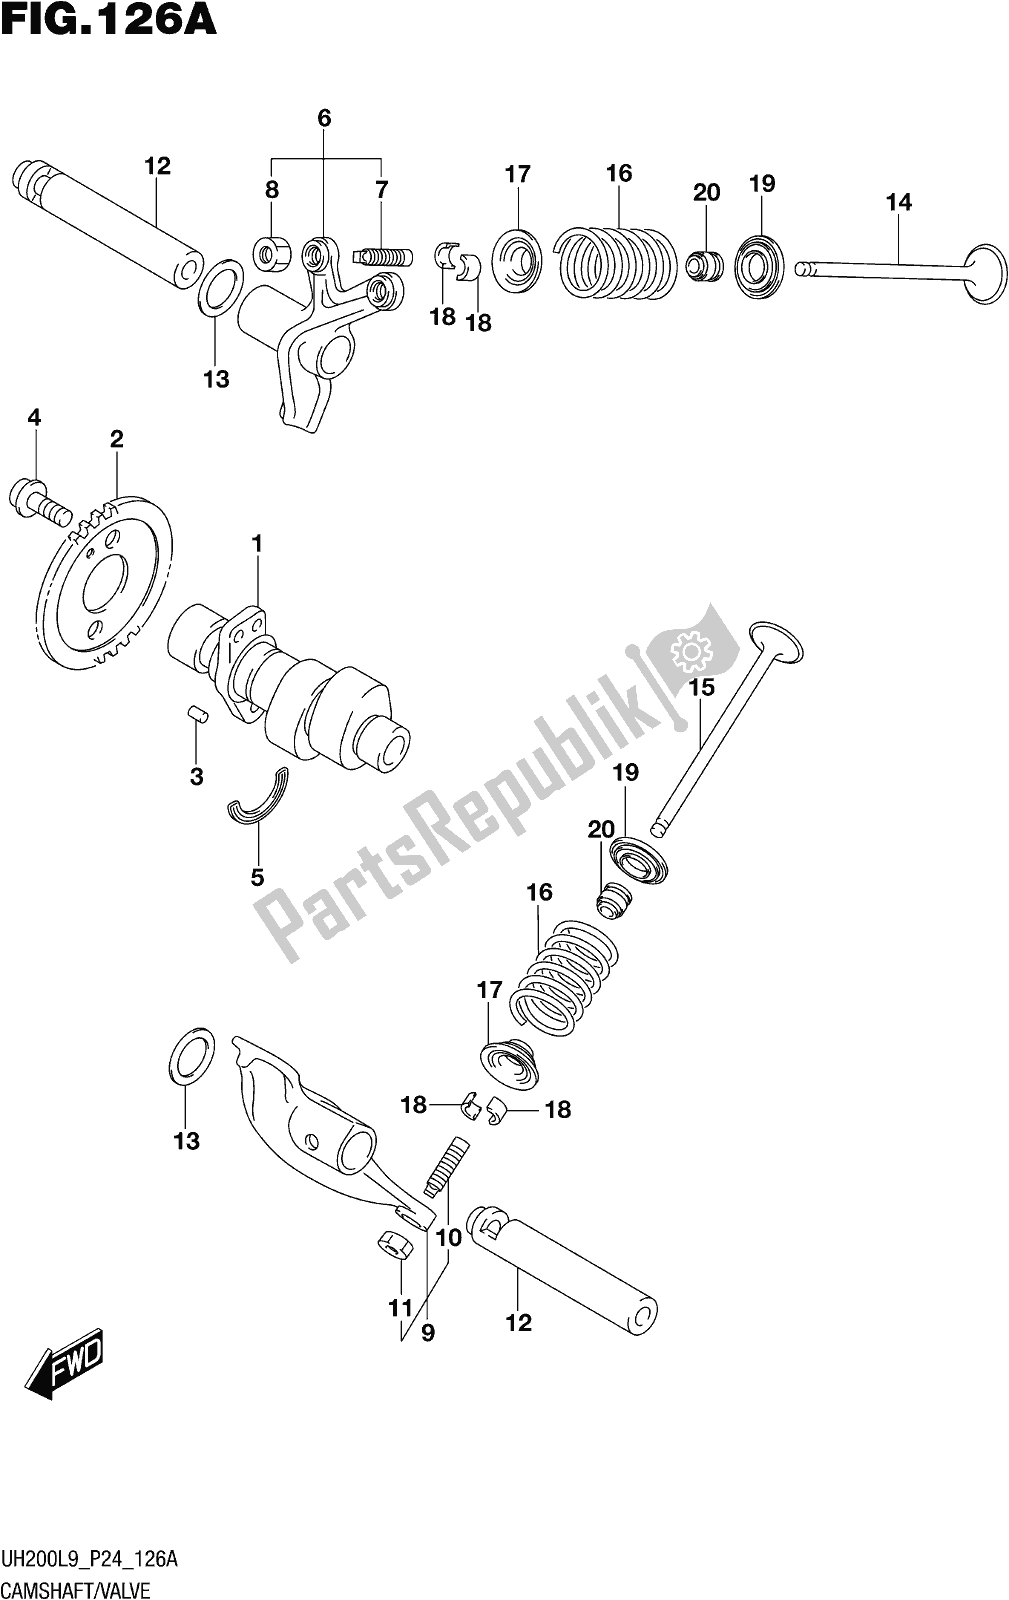 All parts for the Fig. 126a Camshaft/valve of the Suzuki UH 200 2019